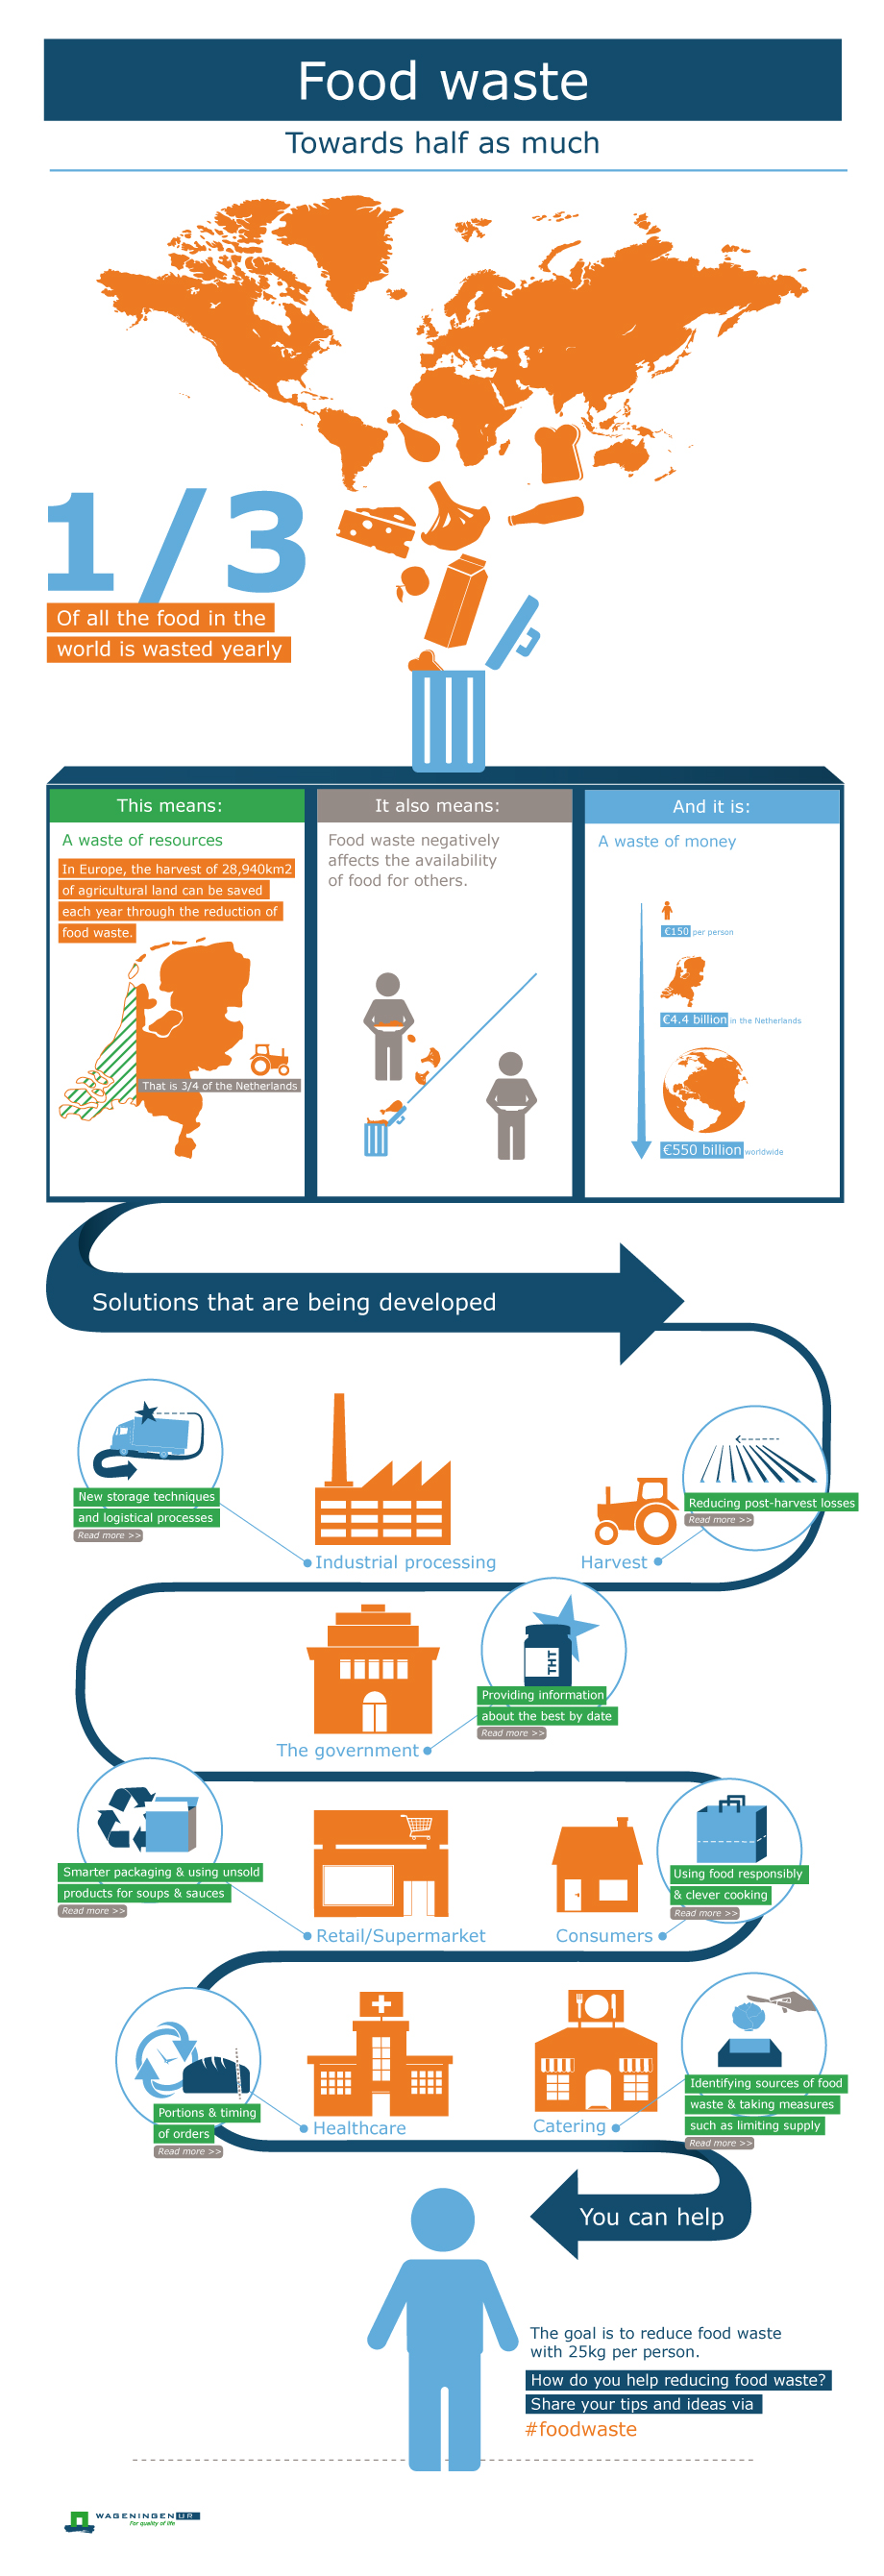 Voedselverspilling_infographic